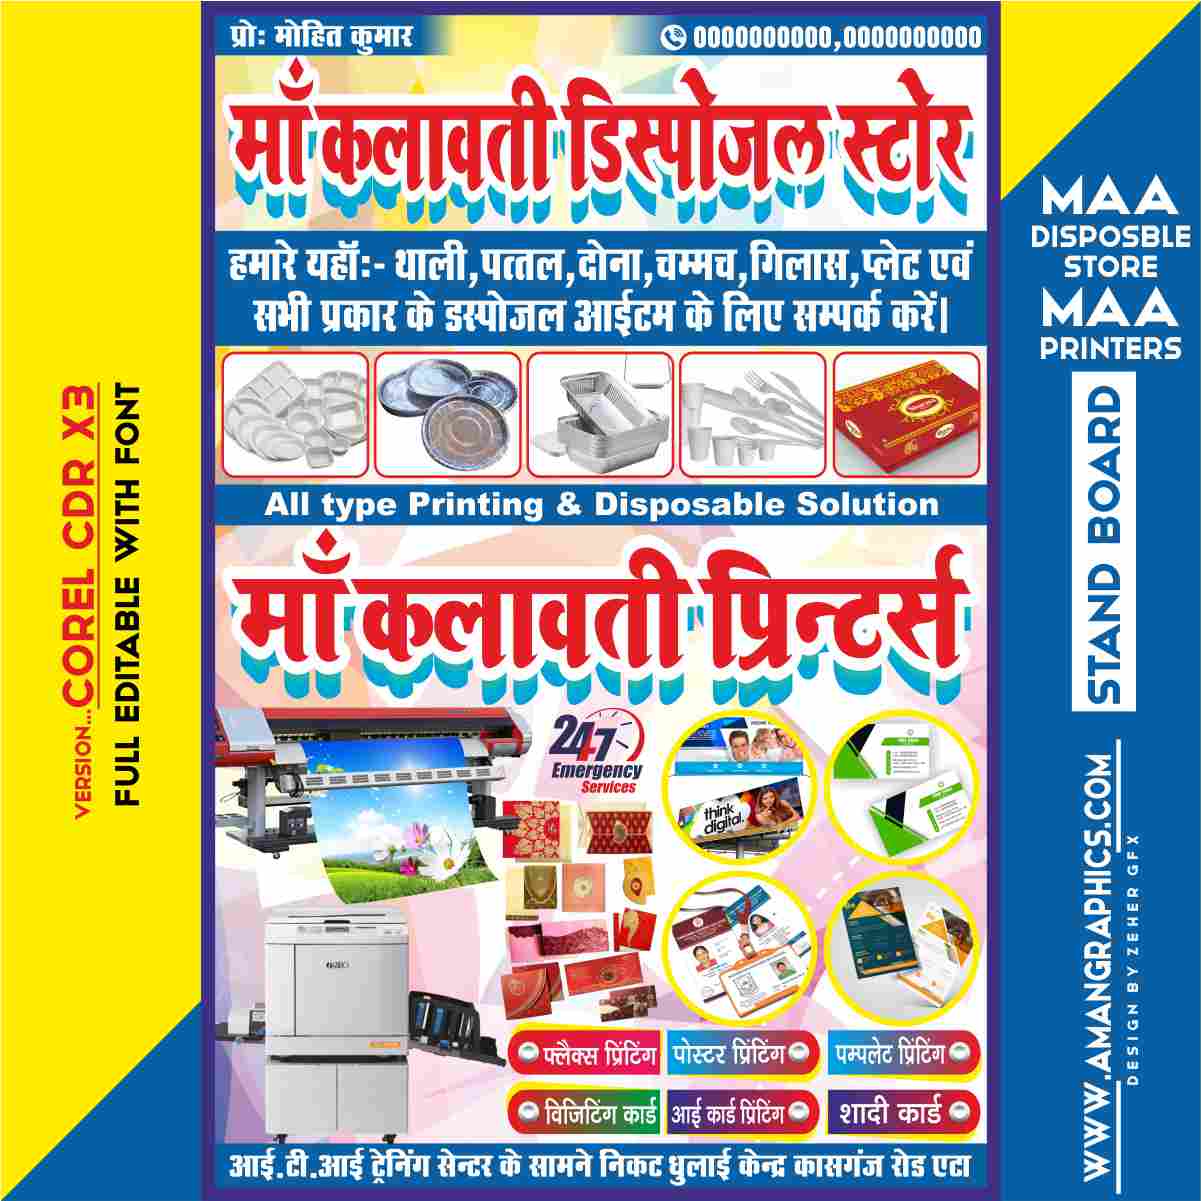 Maa Kalawati Disposable Store And Printers Banner Design Cdr FIle FLEX BANNER PAMPHLET